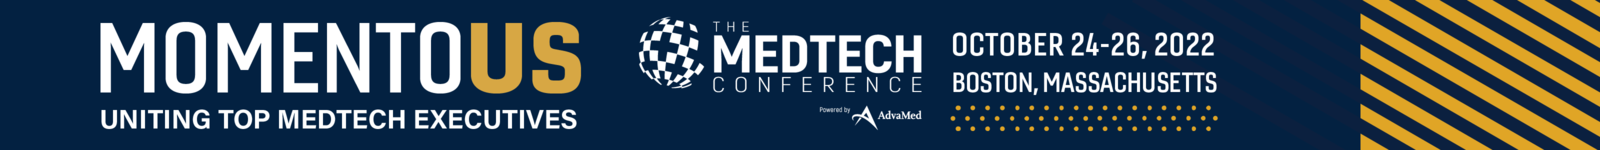 The MedTech Conference 2022 logo